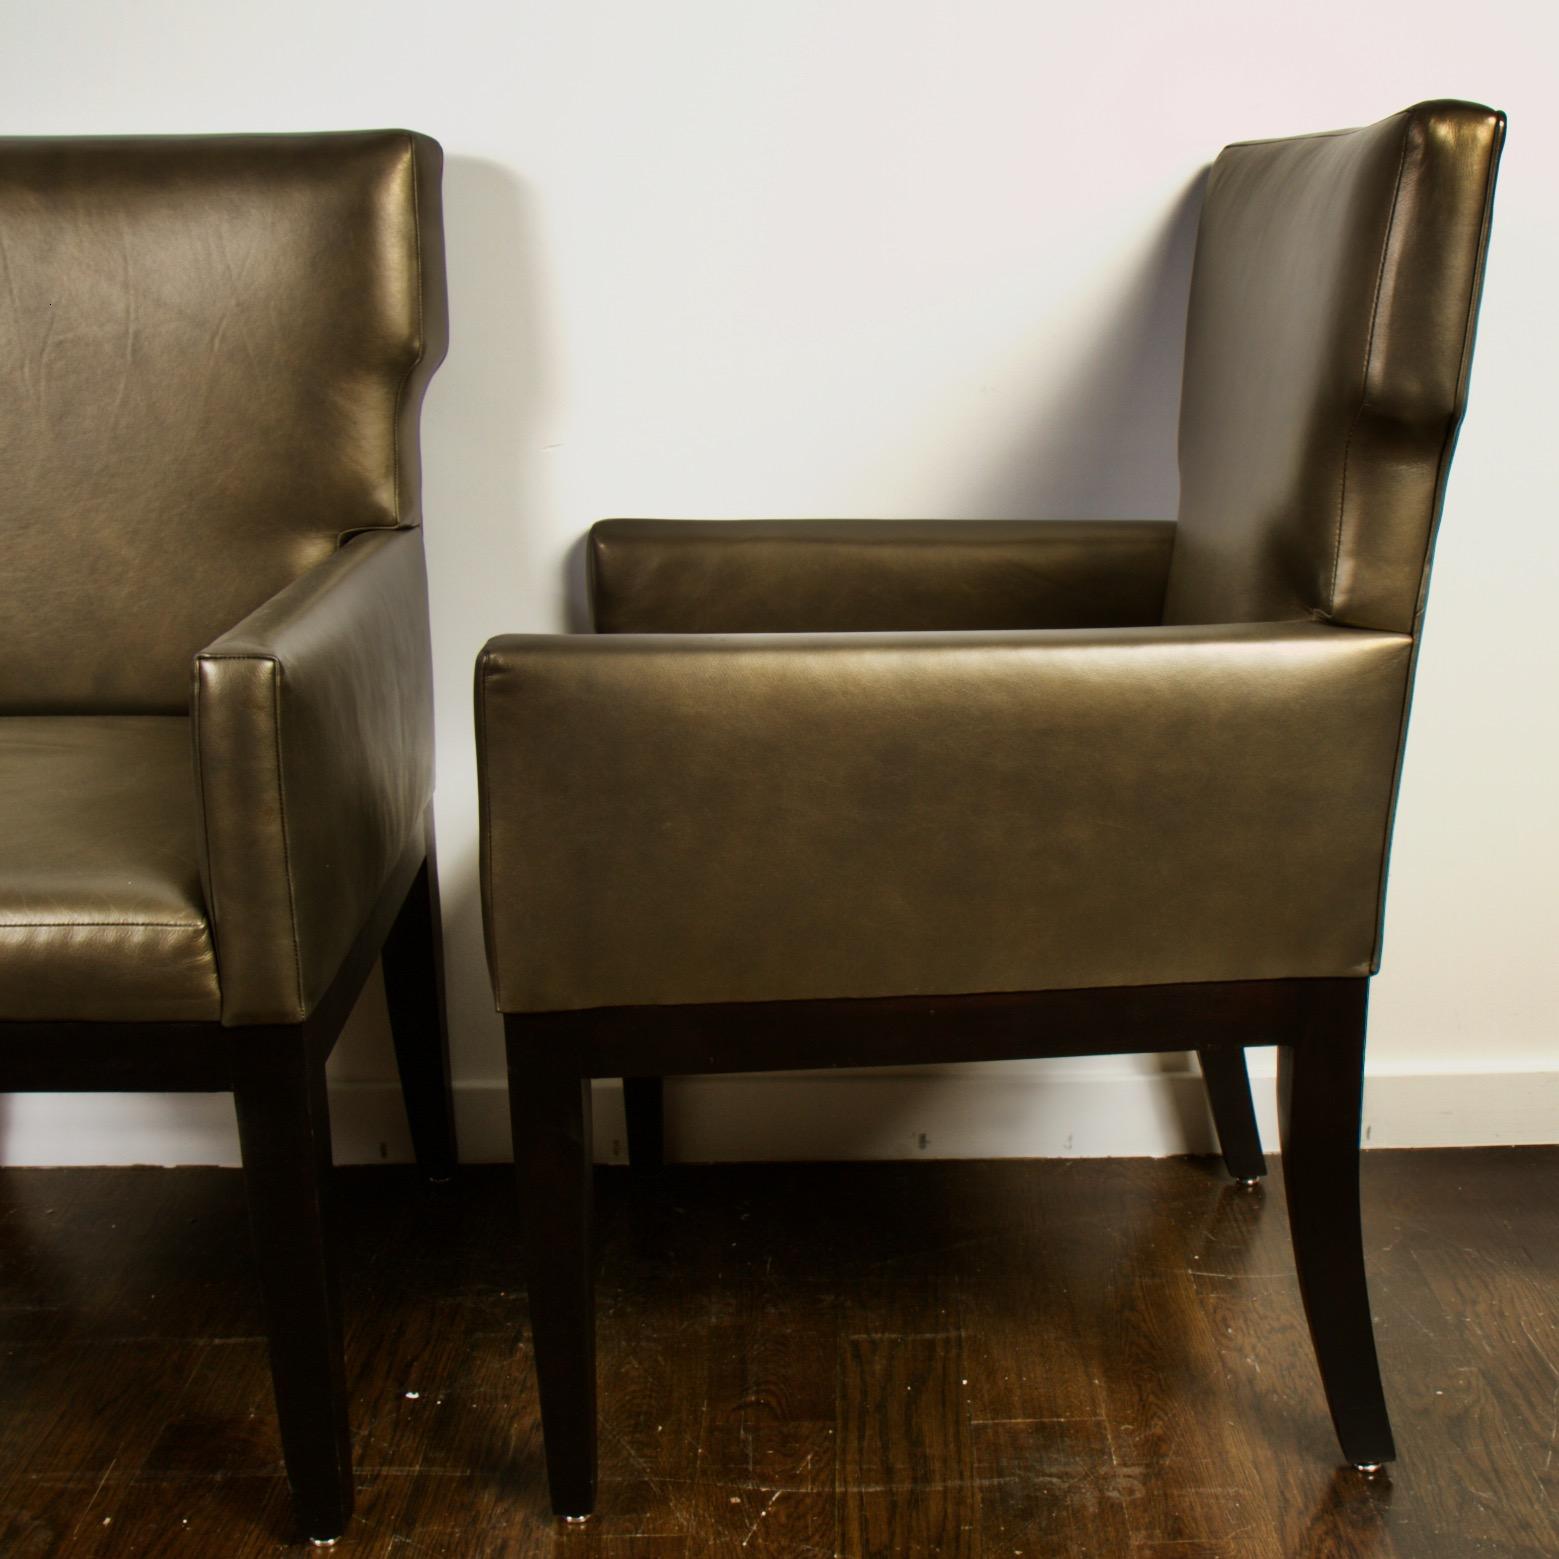 Pair of clean dark khaki green leather armchairs very reminiscent of Christian Liaigre's for Holly Hunt. Dark cappuccino frame with slightly curved, tapered legs.